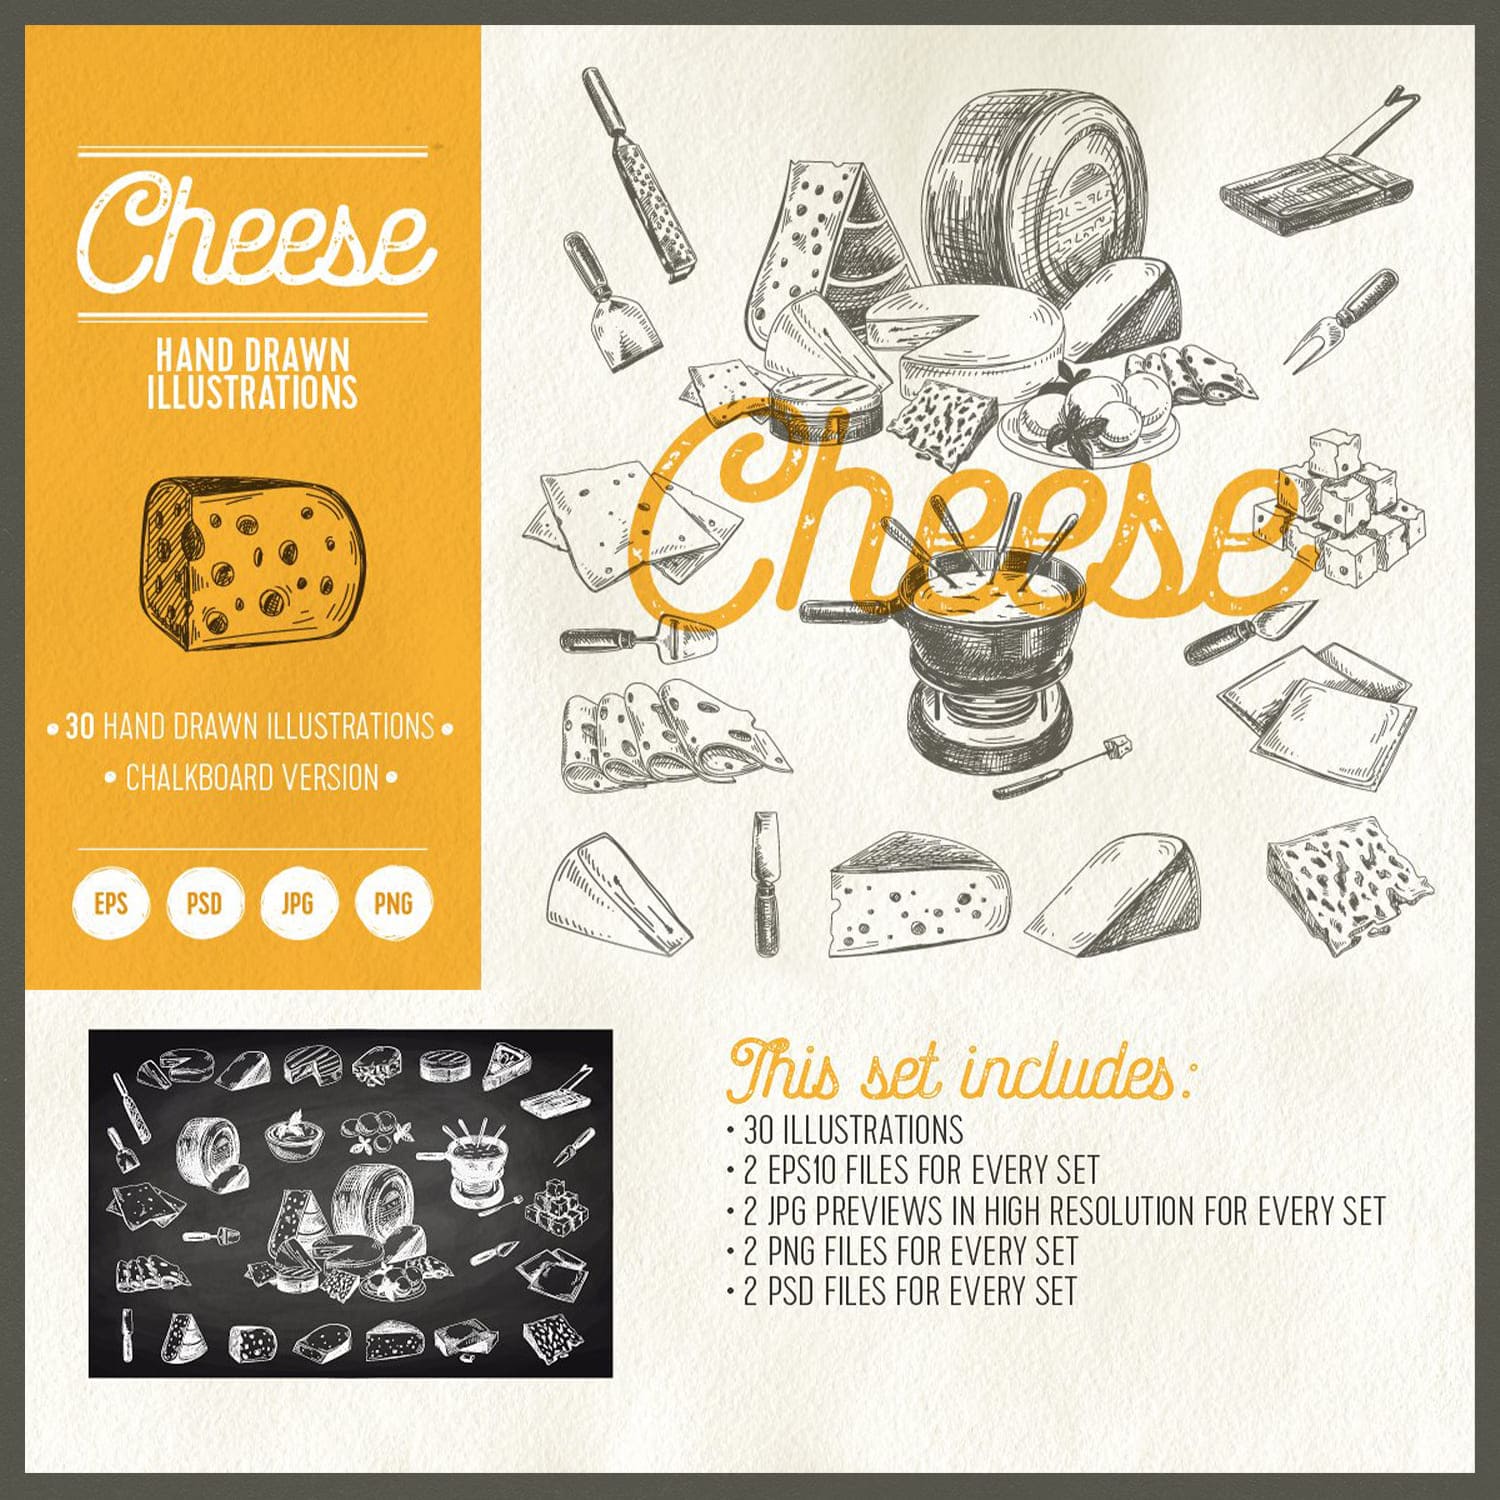 Cheese Hand Drawn Illustrations, List Of Files.